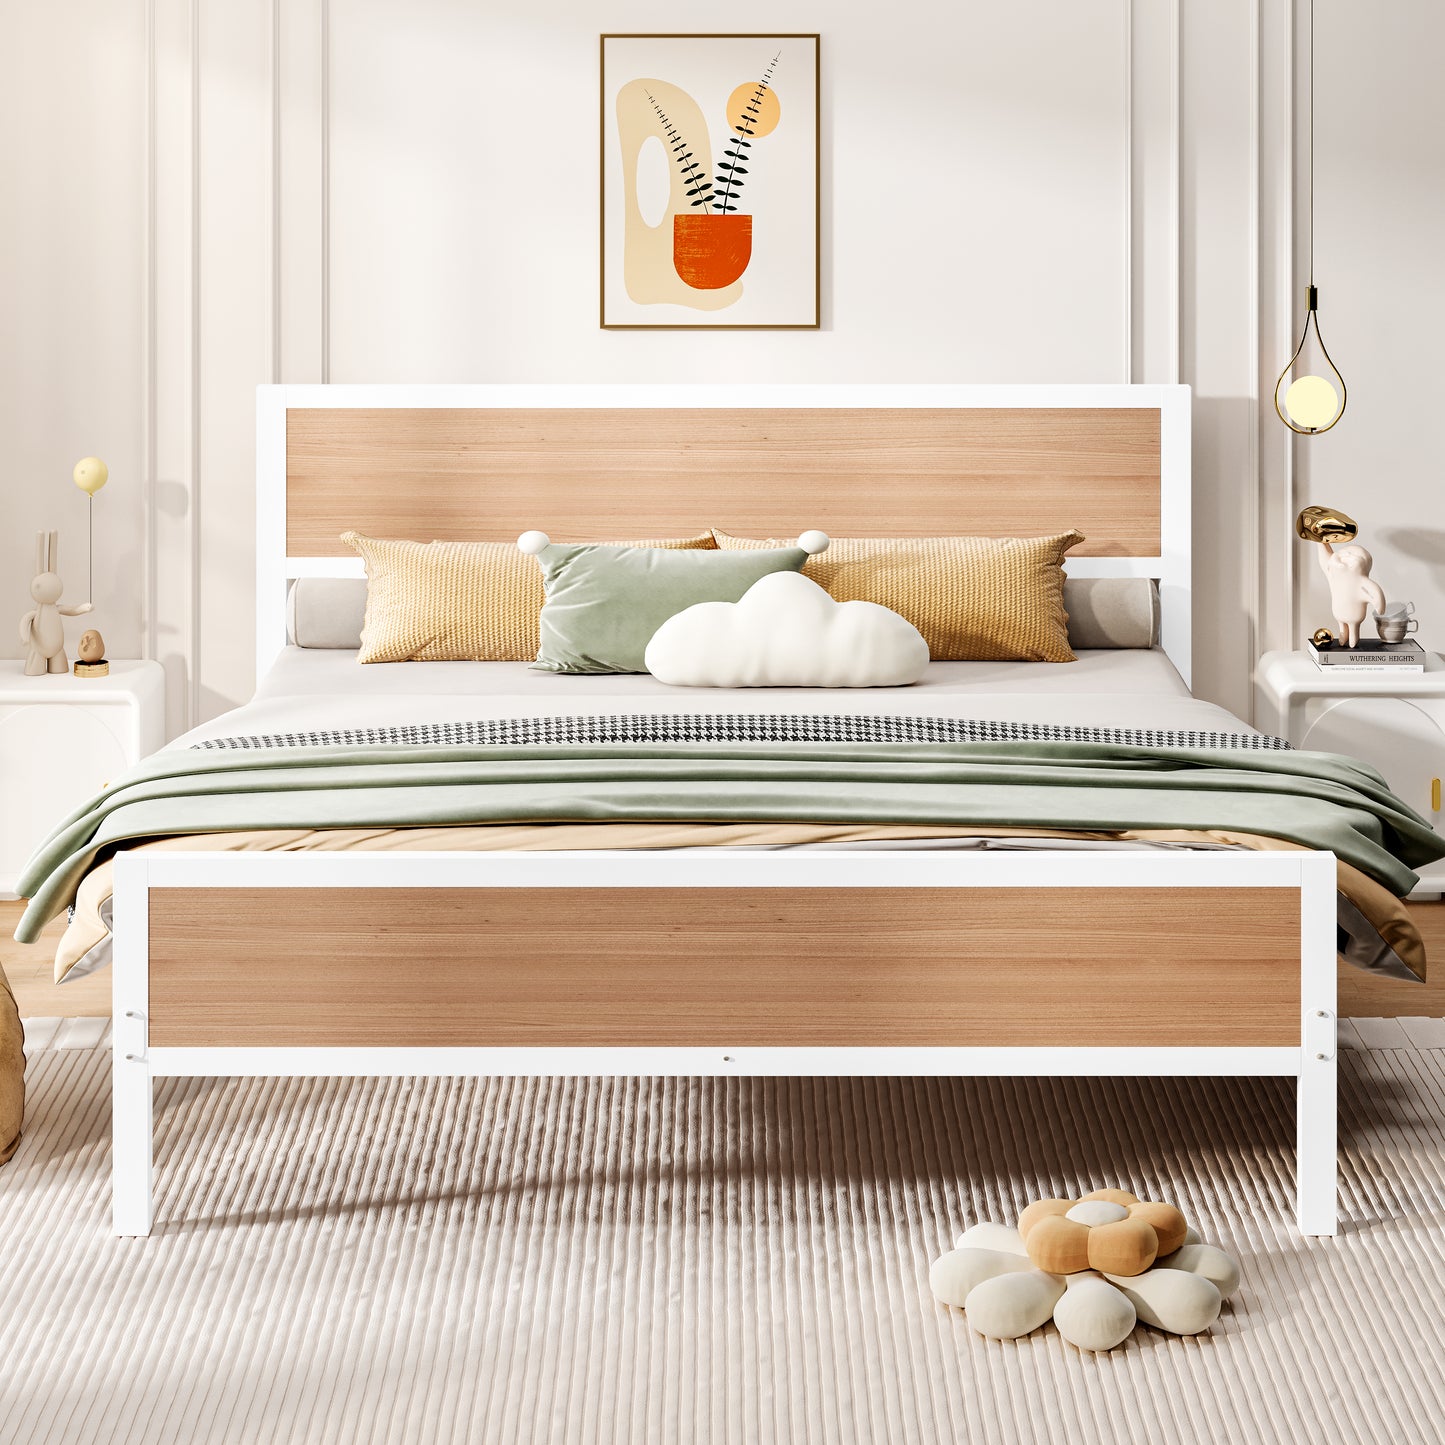 Full Platform Bed Frame with Headboard and Footboard, Metal Full Size Bed Frame with Underbed Storage and Strong Slat Support, Bedroom Furniture, No Box Spring Needed, White